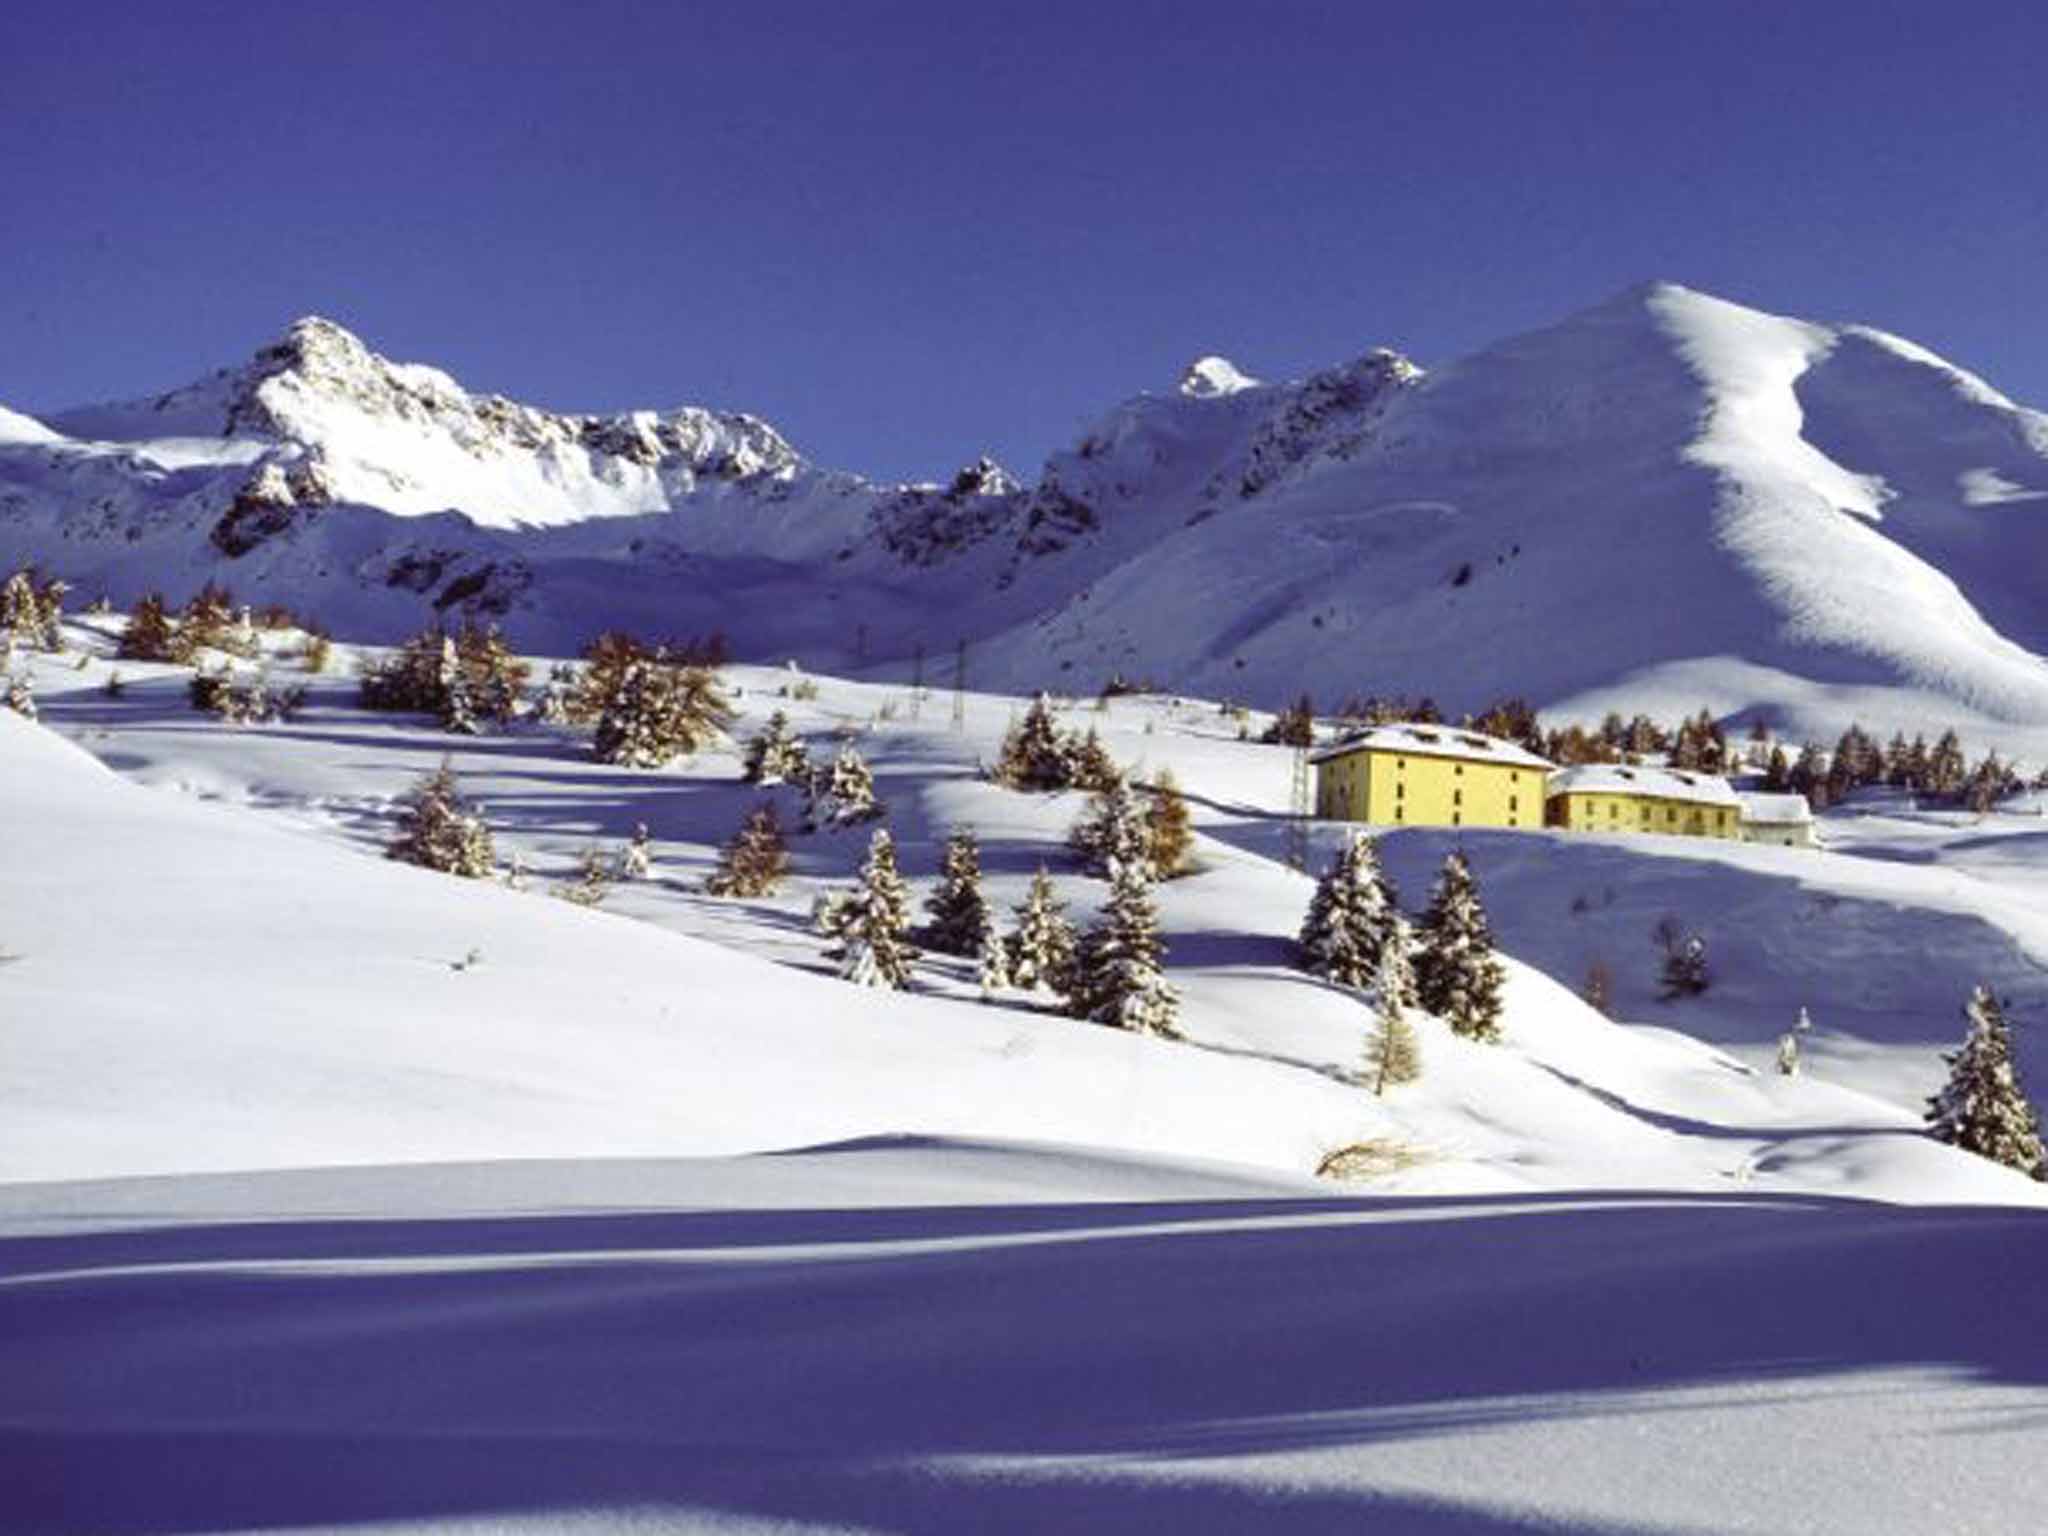 All white: the now-snowy slopes of Passo Tonale